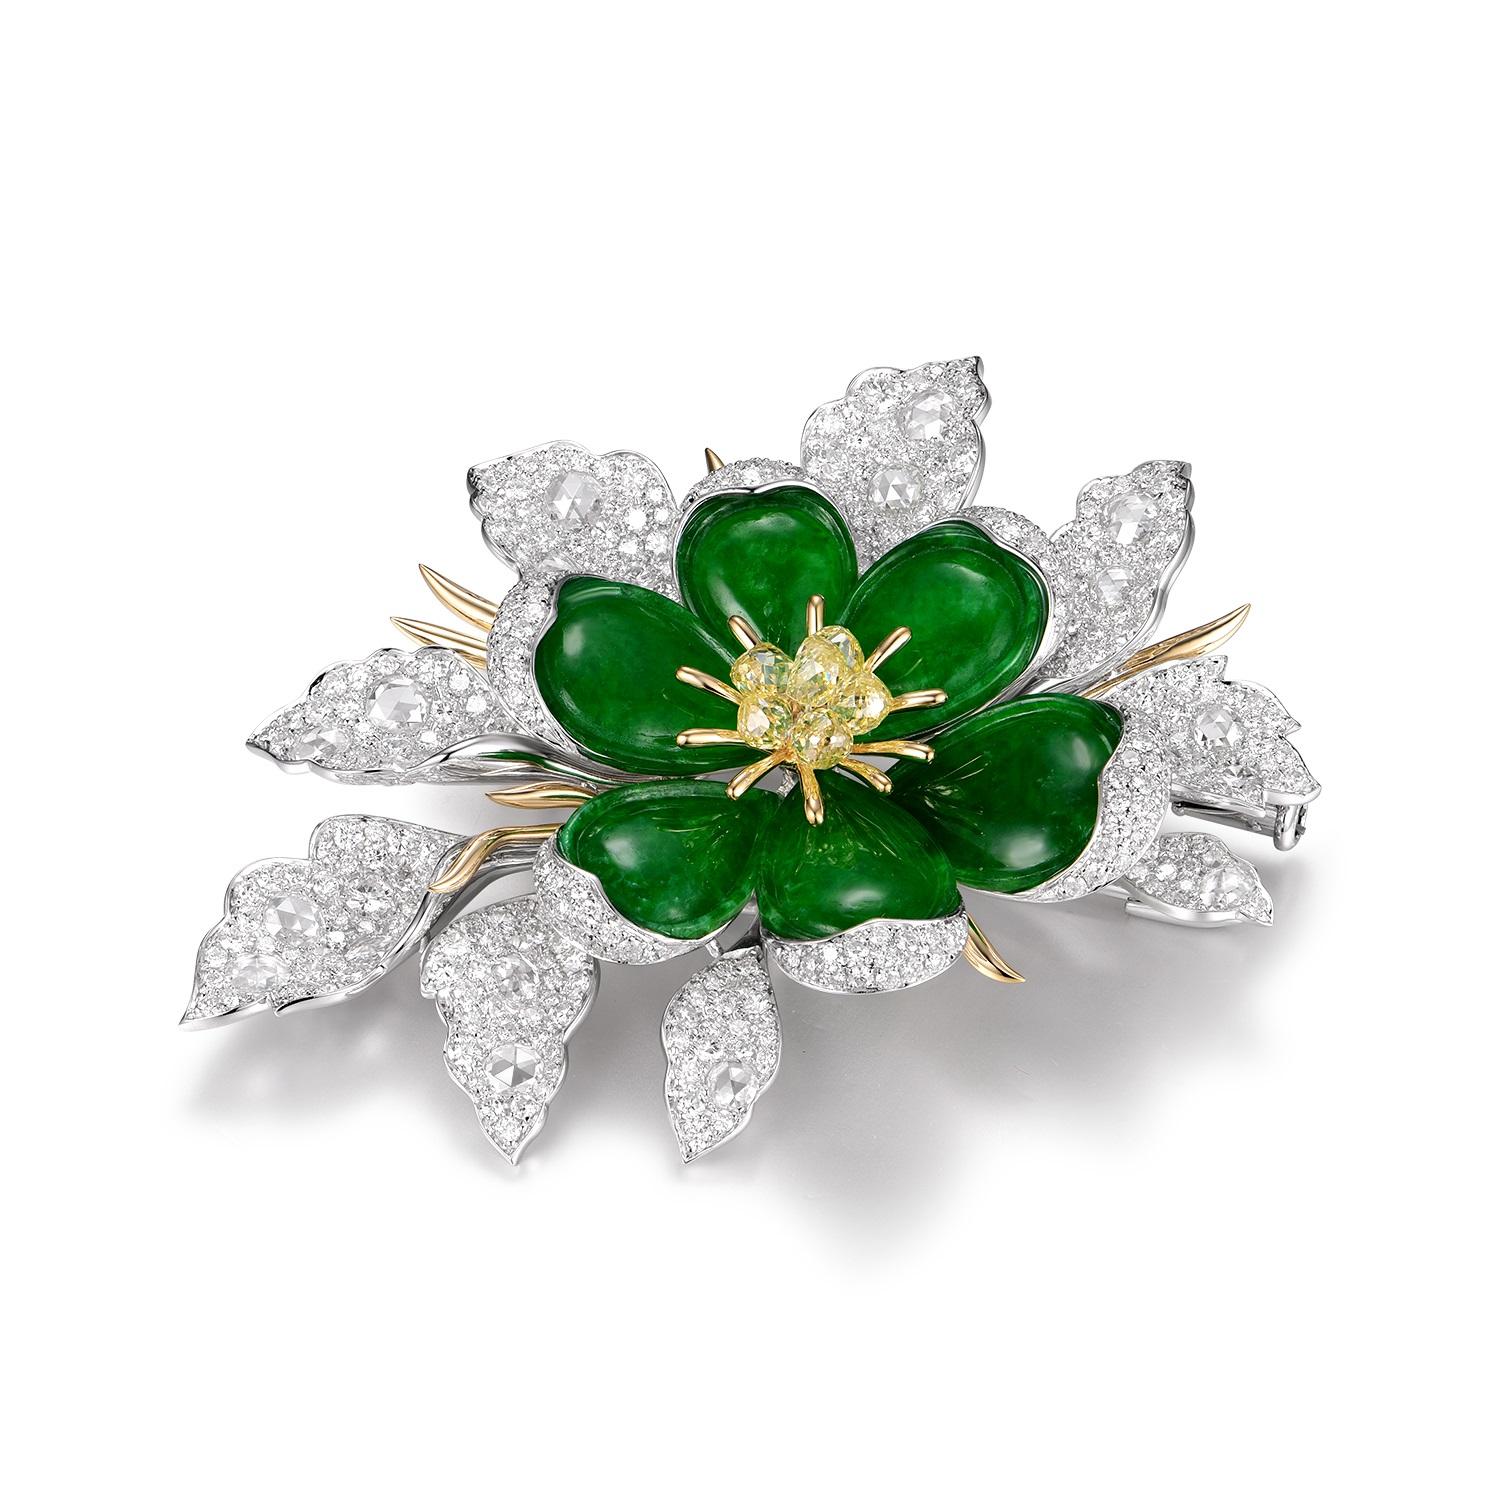 
This brooch is a luxurious amalgamation of nature-inspired elements and opulent materials. Crafted in 18-karat white and yellow gold, it features six pieces of jade, combining to a total weight of 7.0 carats, arranged in a symmetrical floral